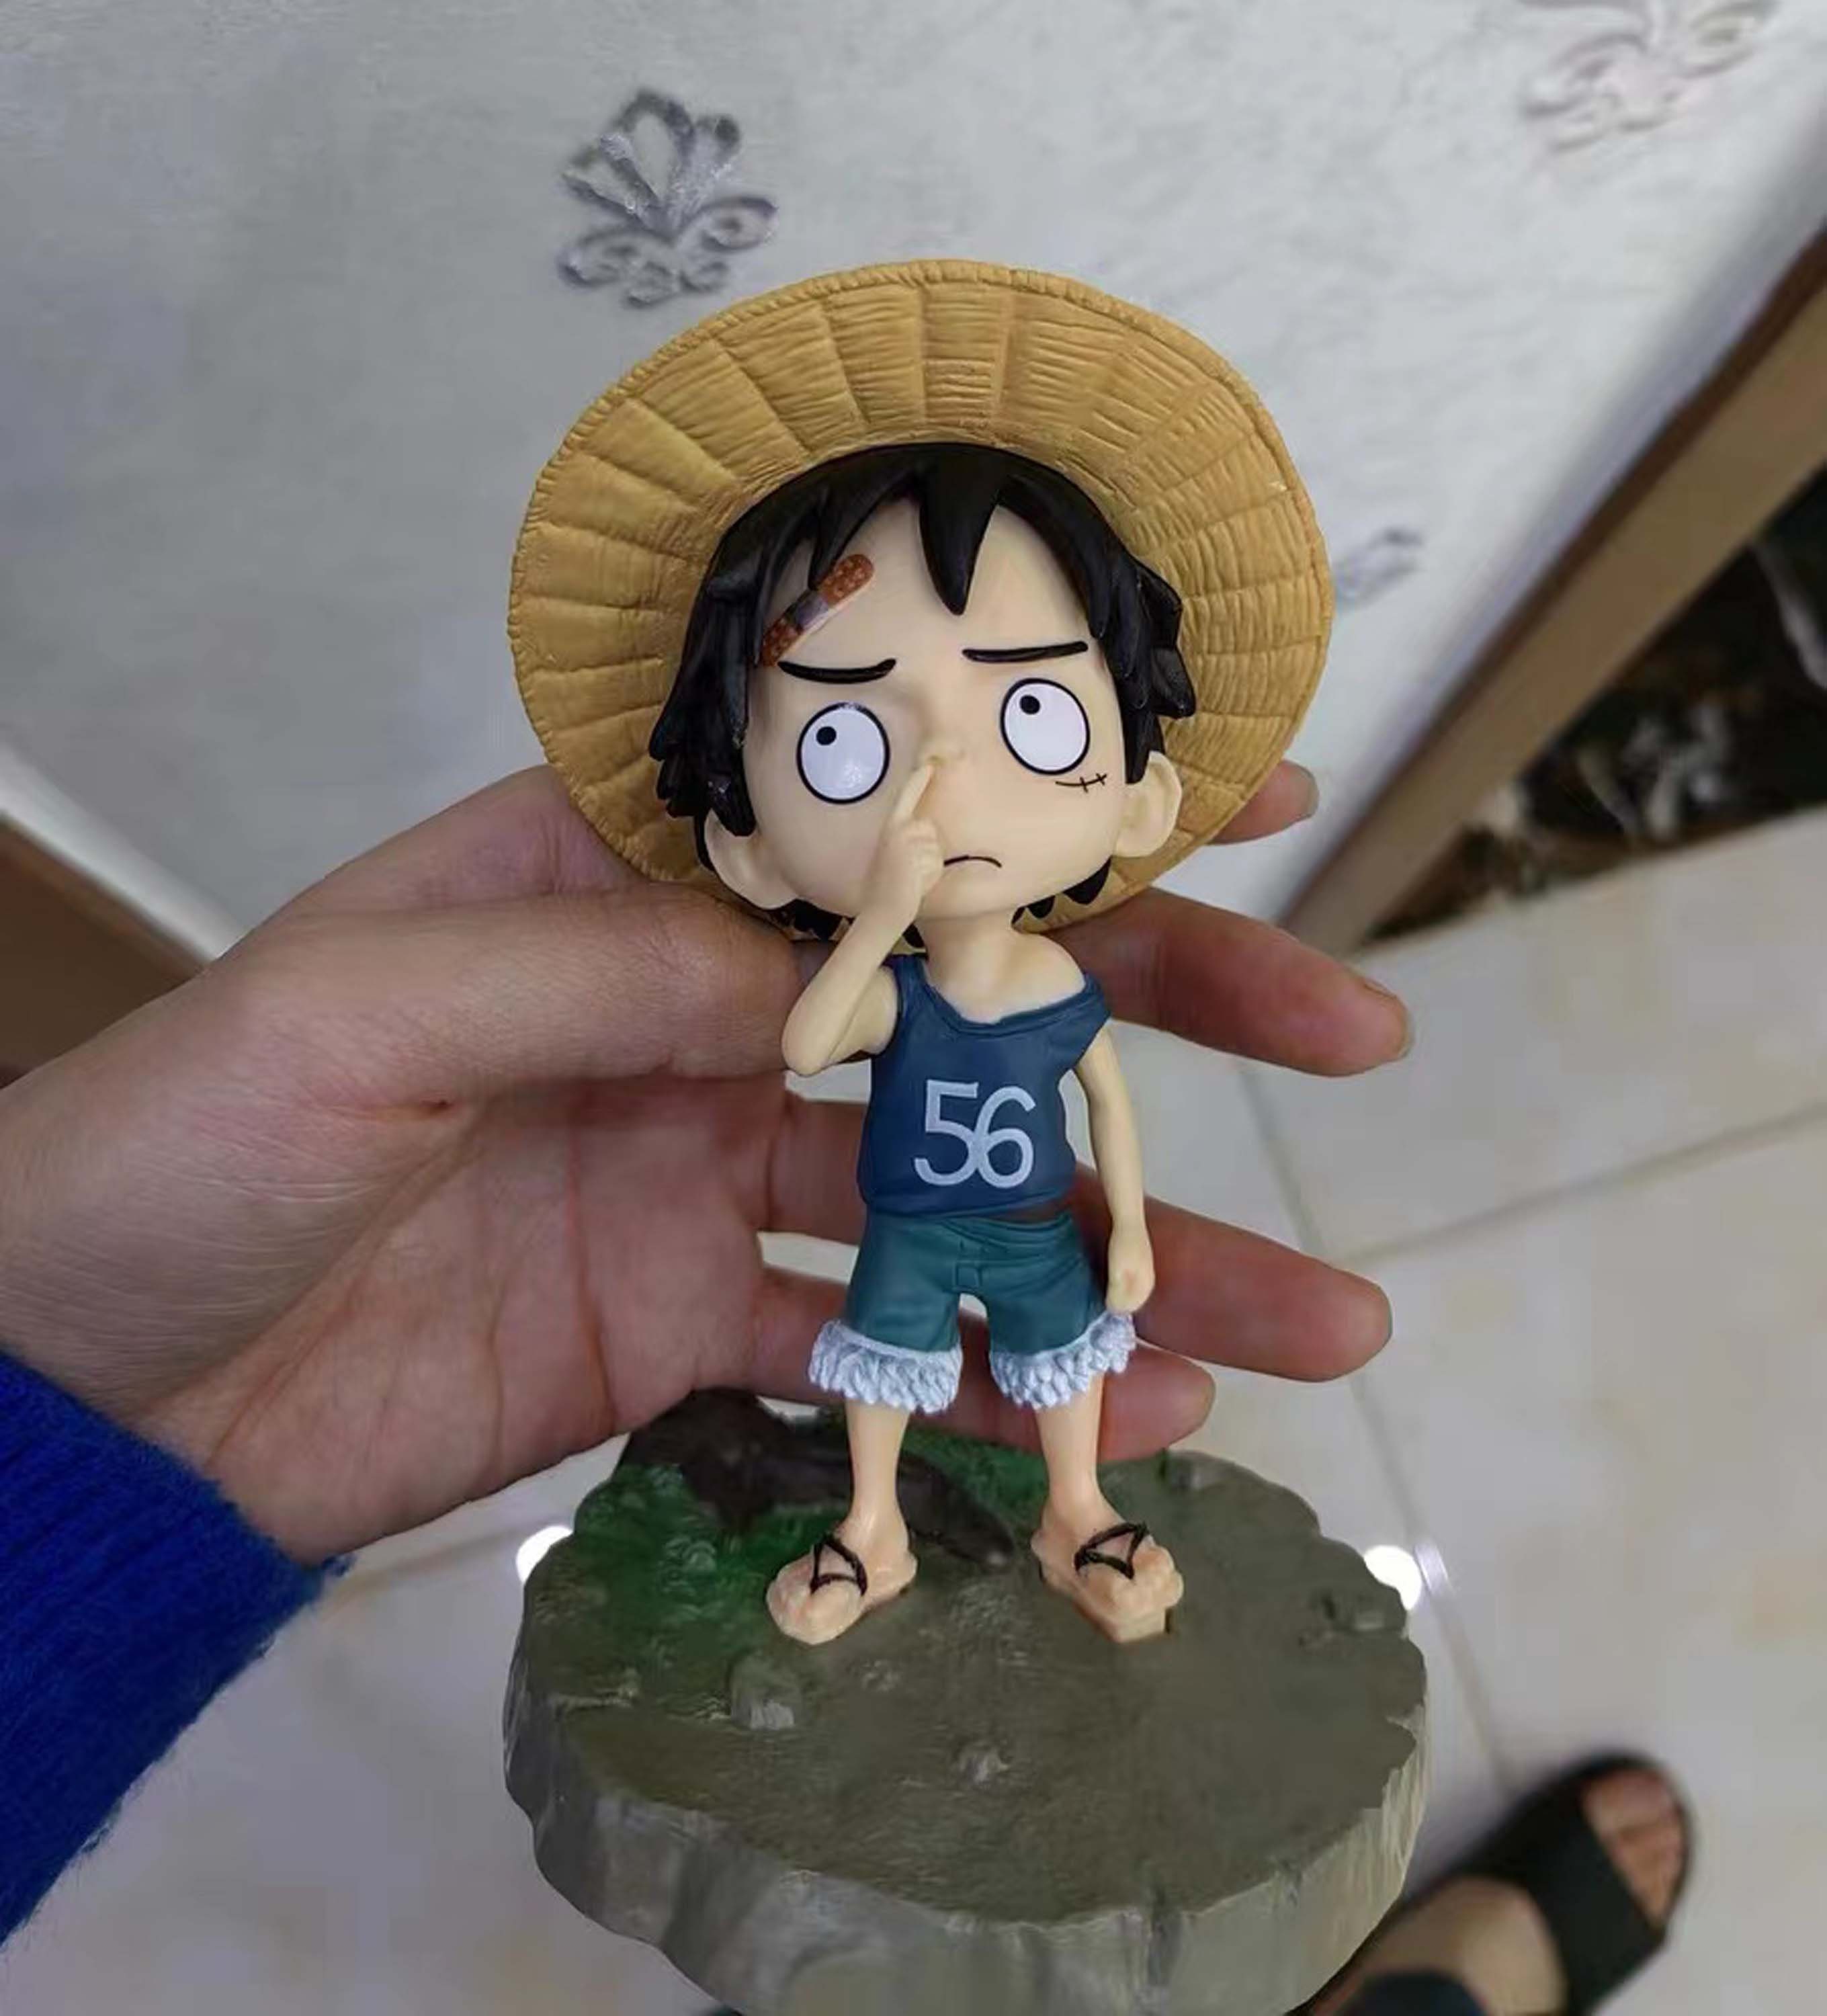 One Piece Luffy Gear 5 Anime Figure Bust Nika Joyboy Statue PVC Action  Figurine Collectible Model Doll Decoration Toys Kids Gift